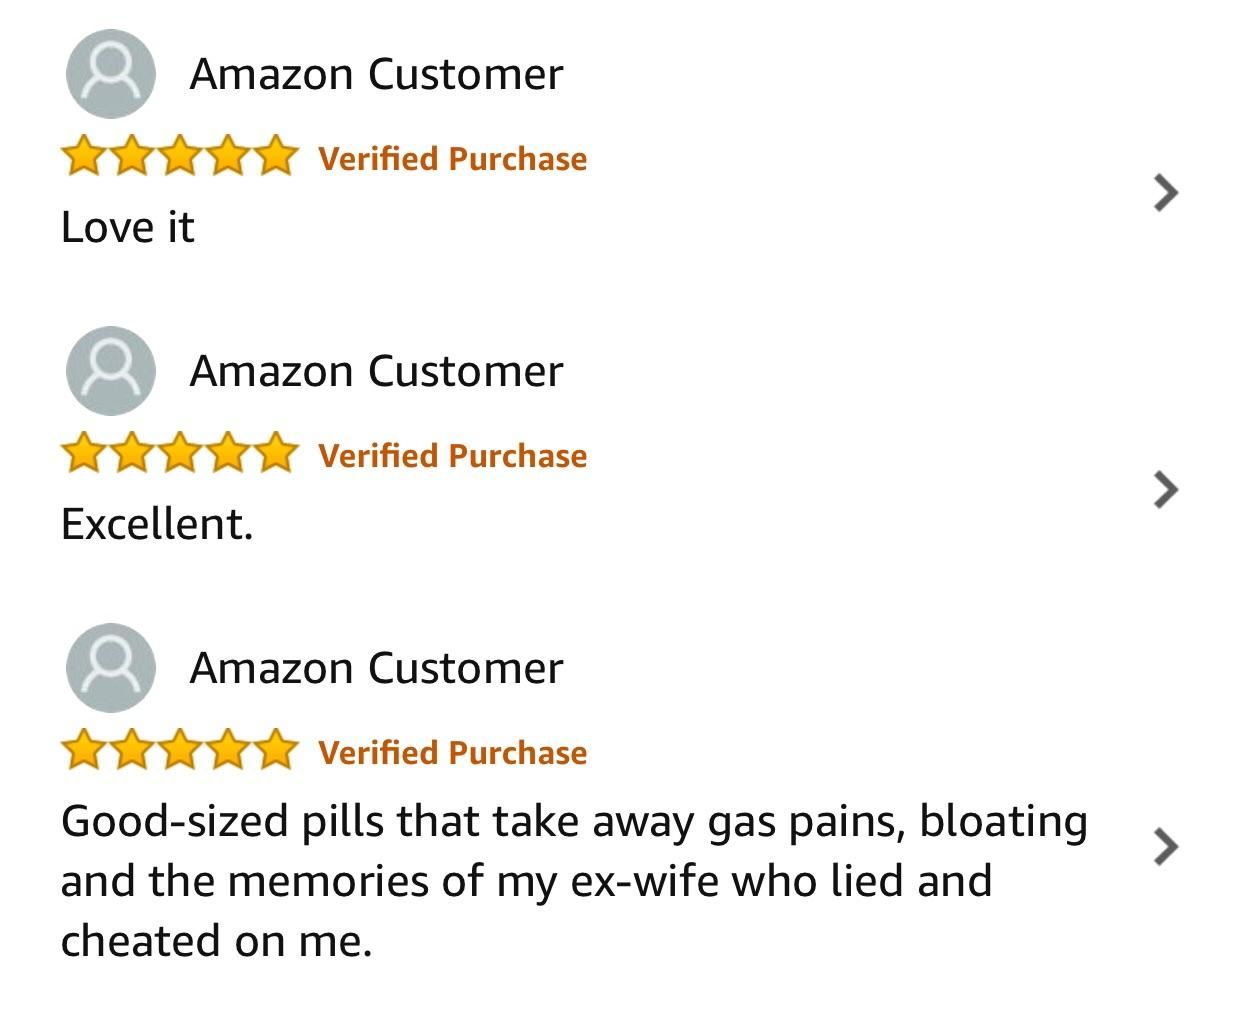 I was looking at reviews for probiotic pills when I found this gem